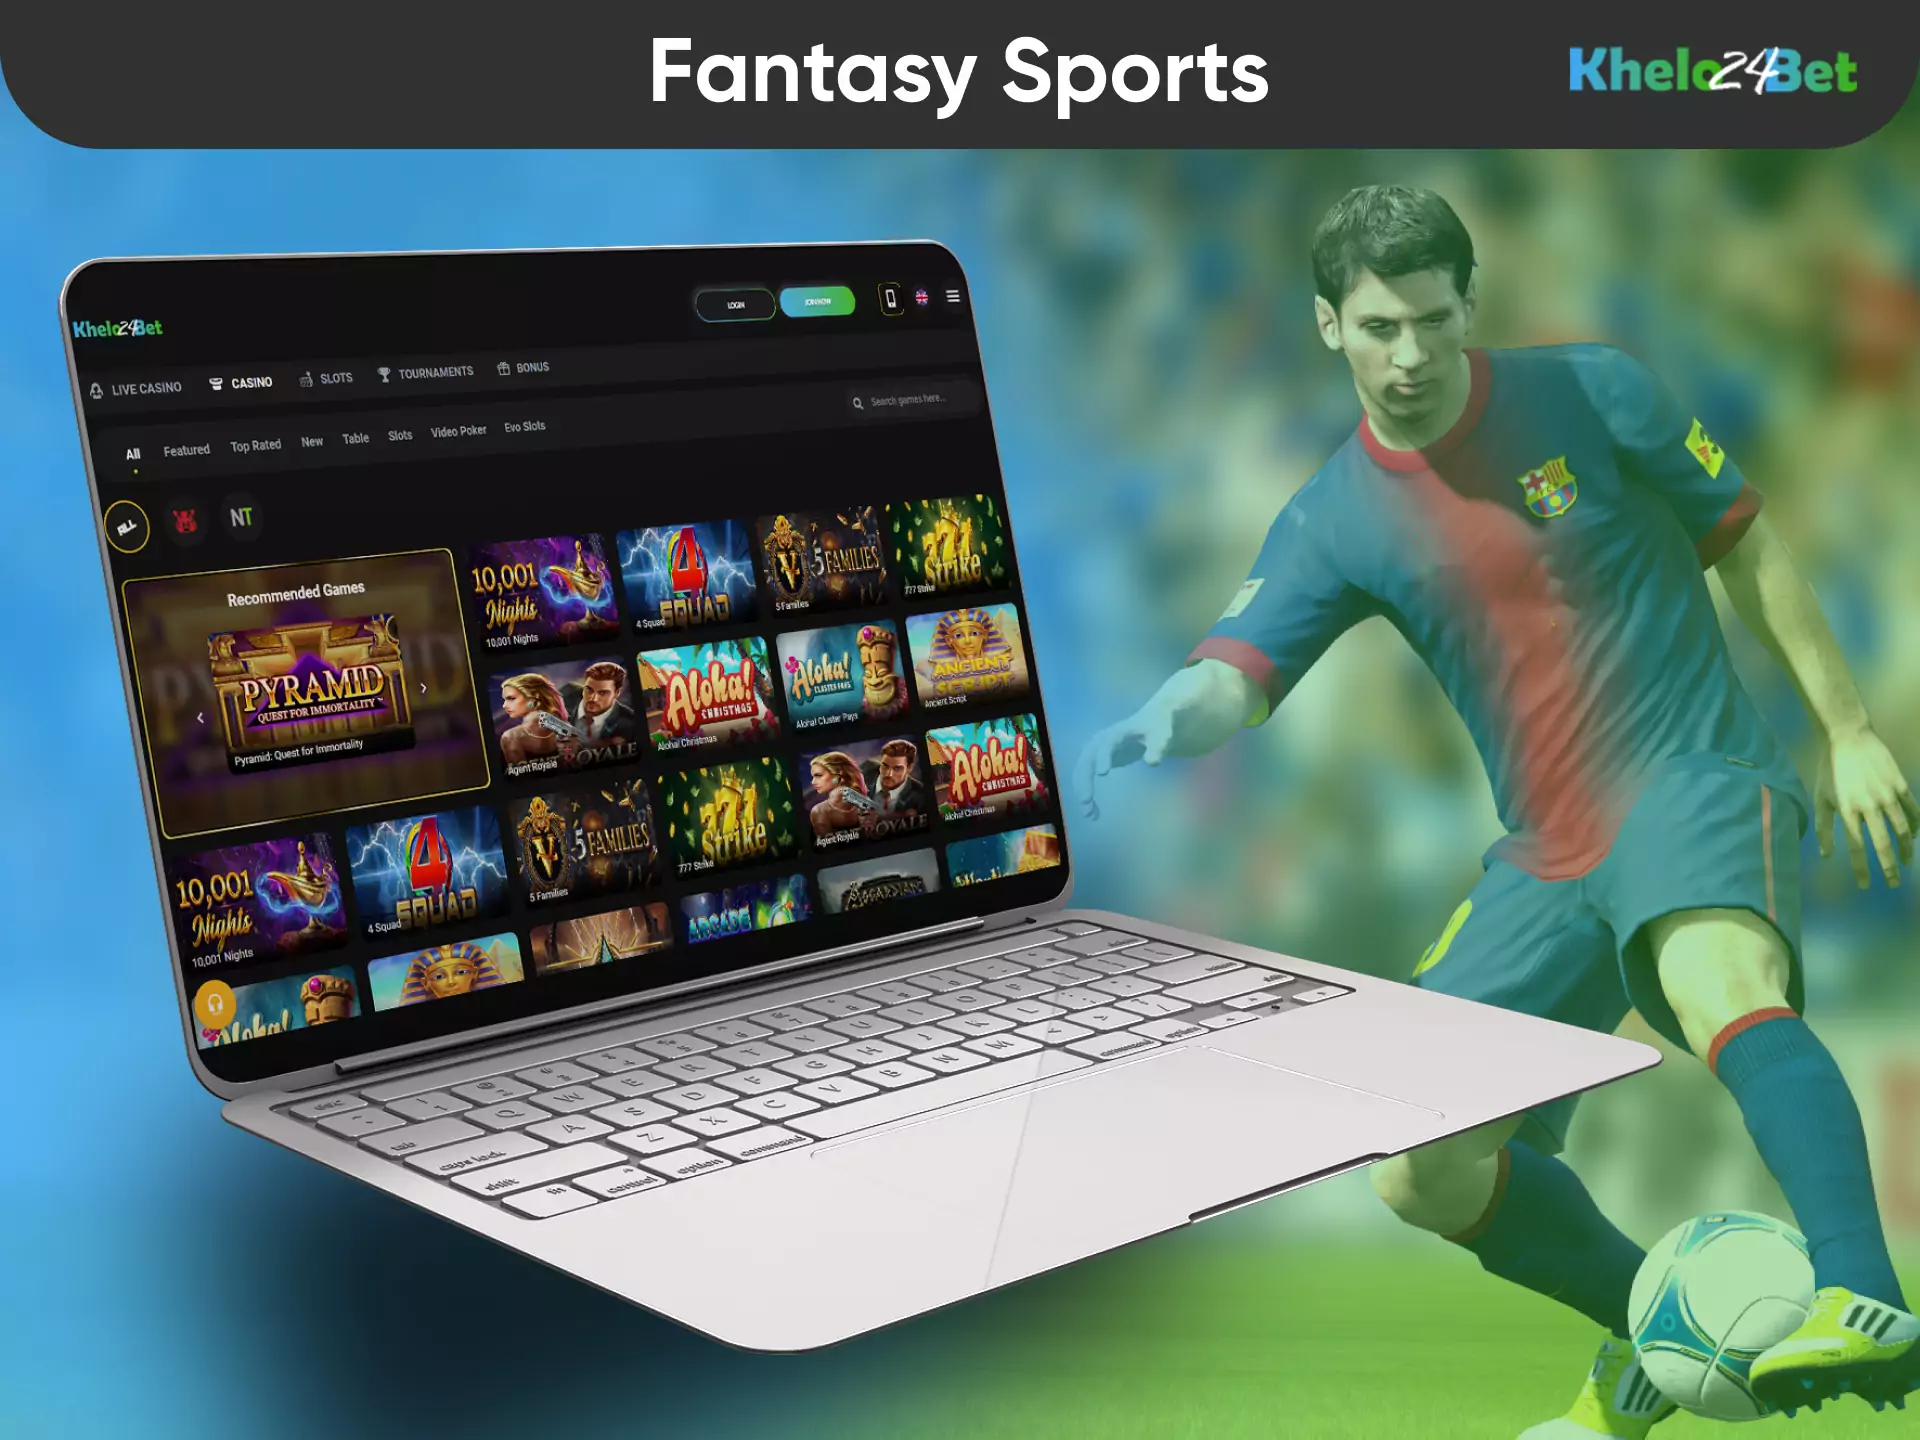 Create your team and place a bet in the Khelo24bet Fantasy.